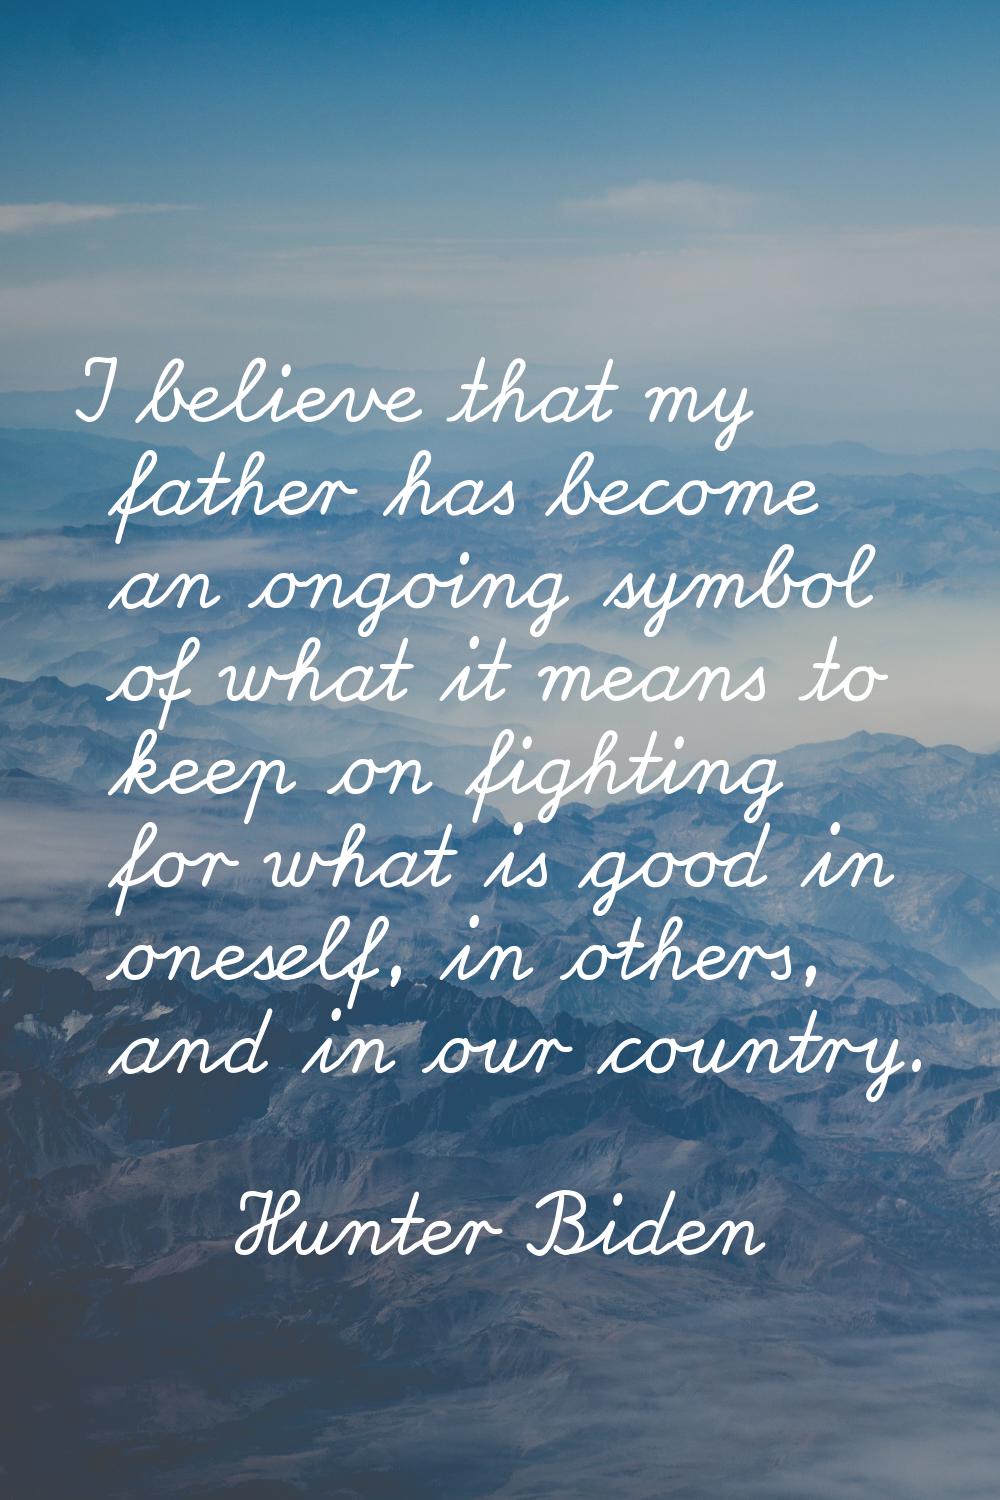 I believe that my father has become an ongoing symbol of what it means to keep on fighting for what